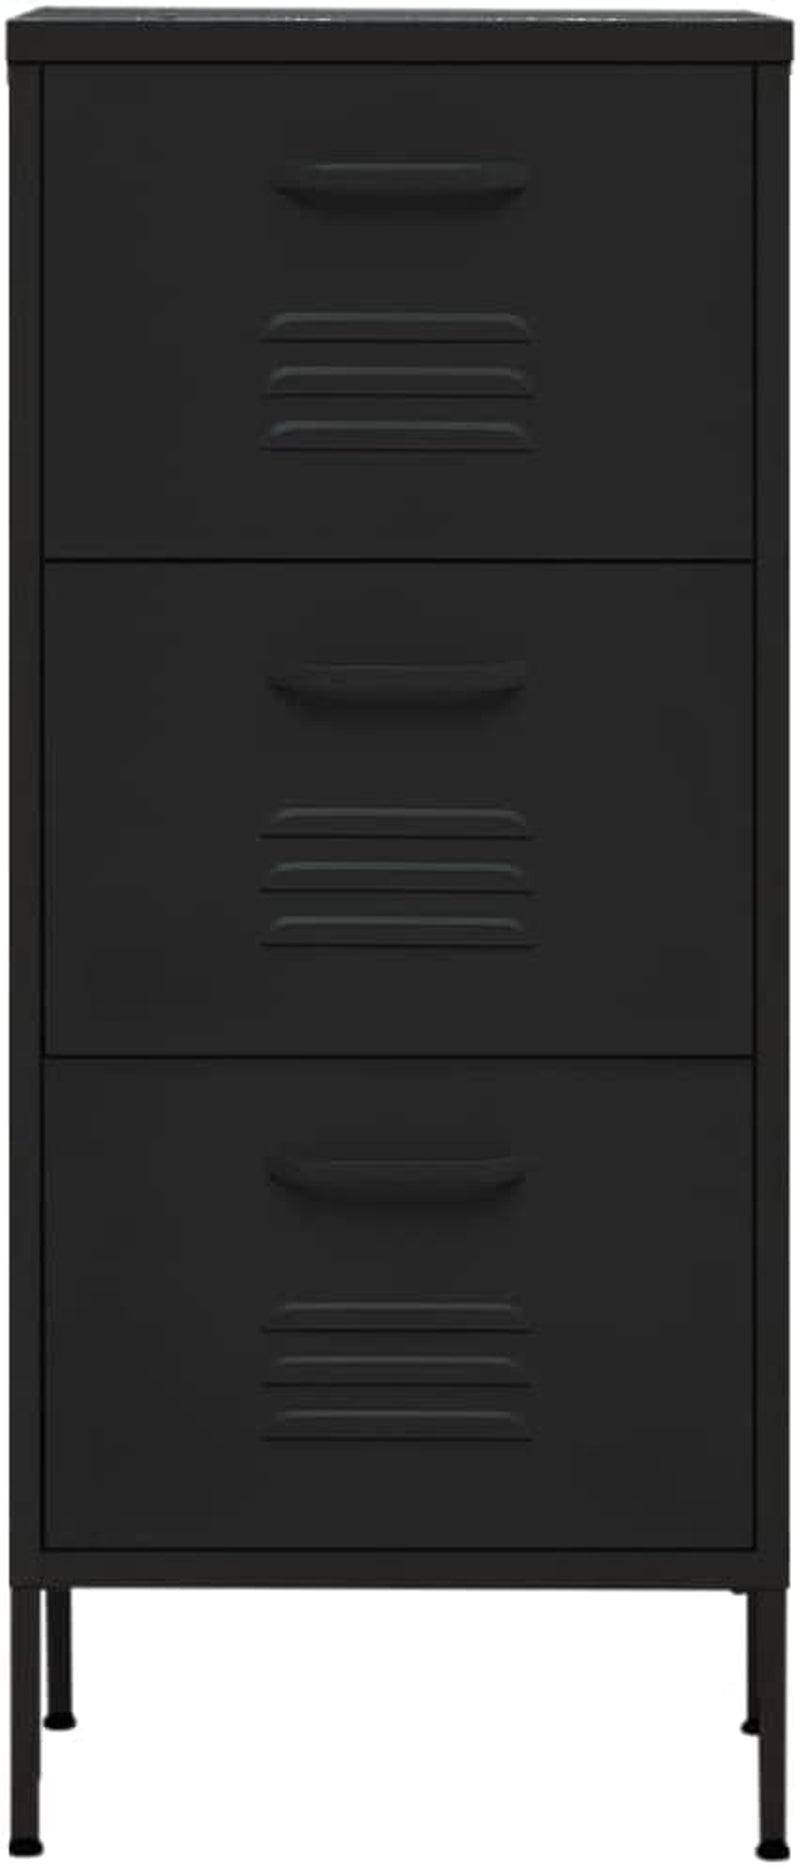 Locker, Filing Cabinet, Standing Cabinet, Bookcase, Black 16.7"X13.8"X40" Steel for Bedroom, Closet, Home, File Office, Storage Collection Furniture Decor Home & Garden > Household Supplies > Storage & Organization ZQQLVOO   